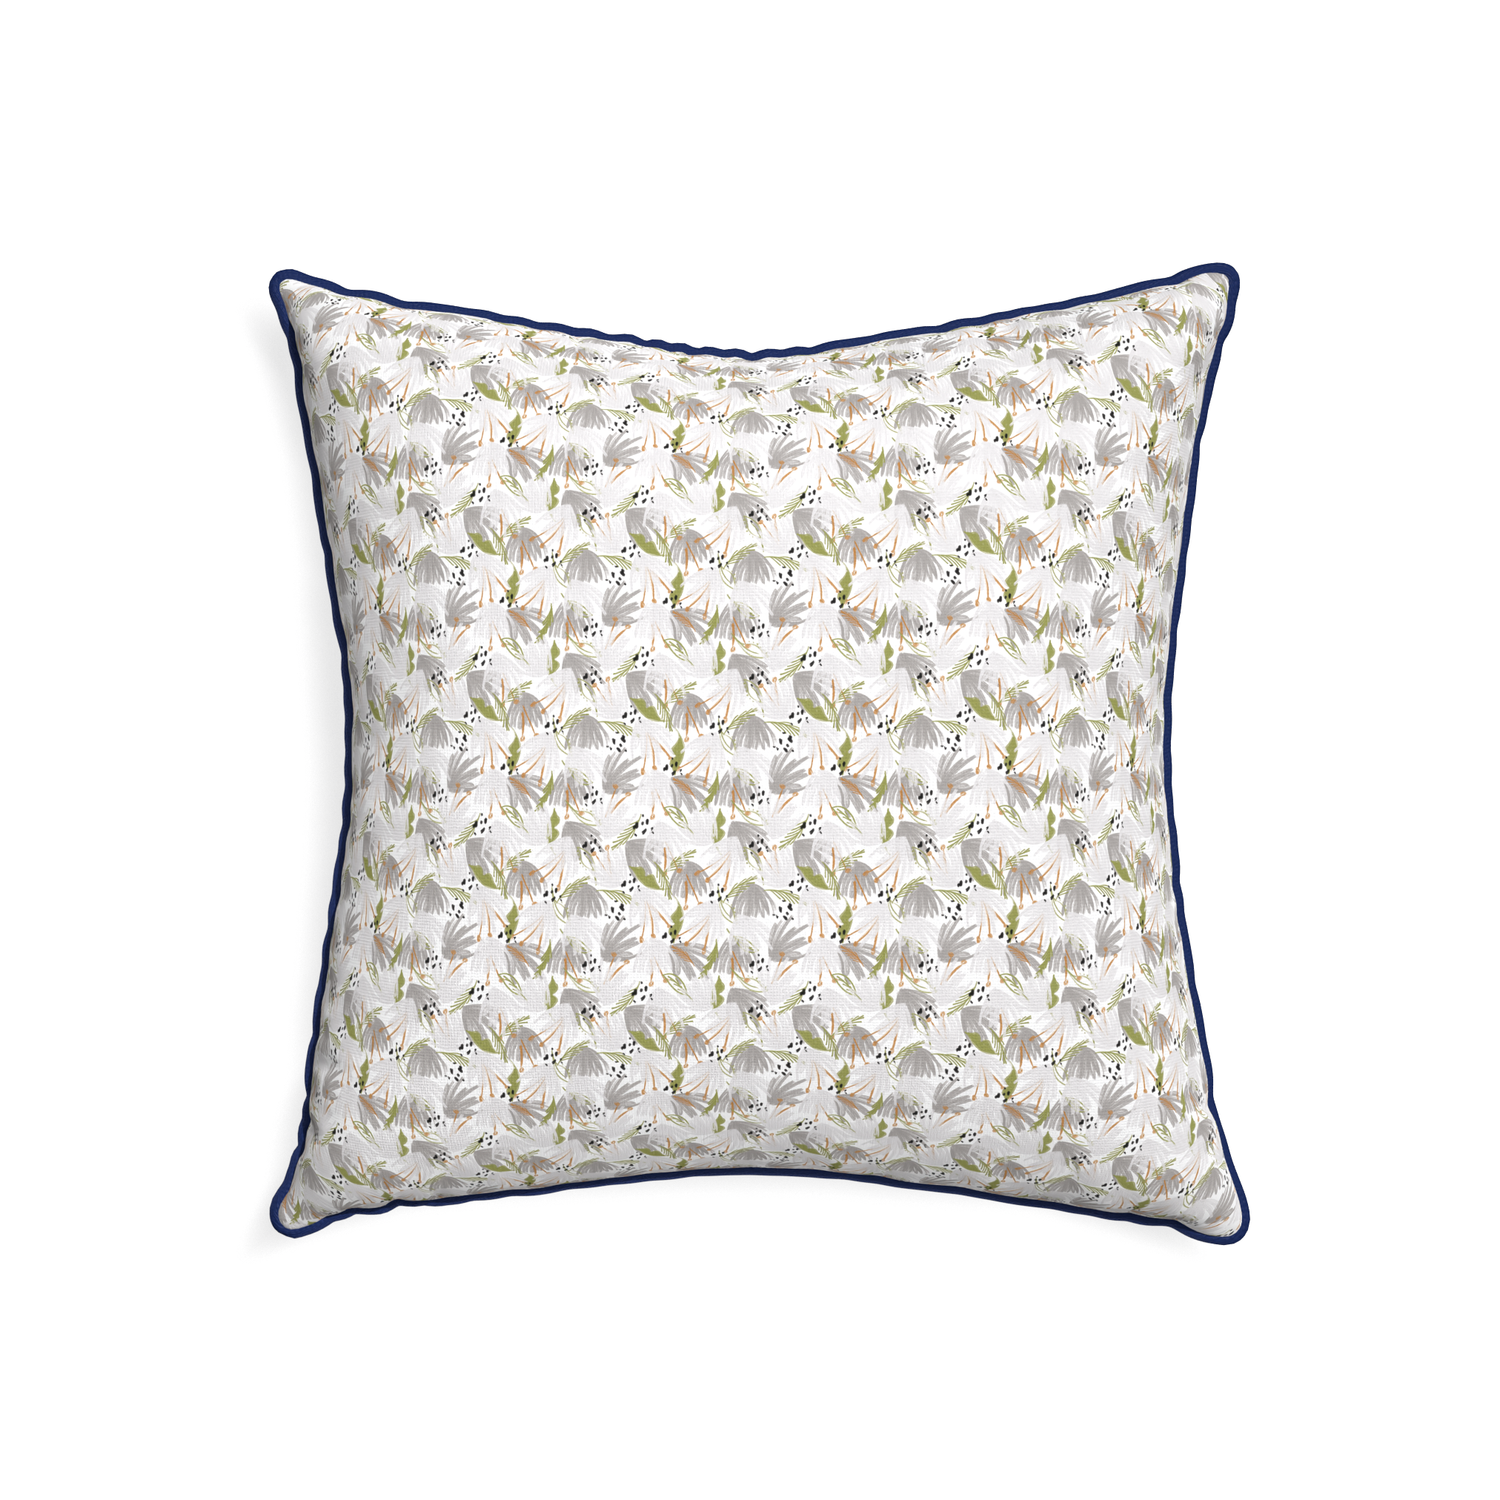 22-square eden grey custom grey floralpillow with midnight piping on white background